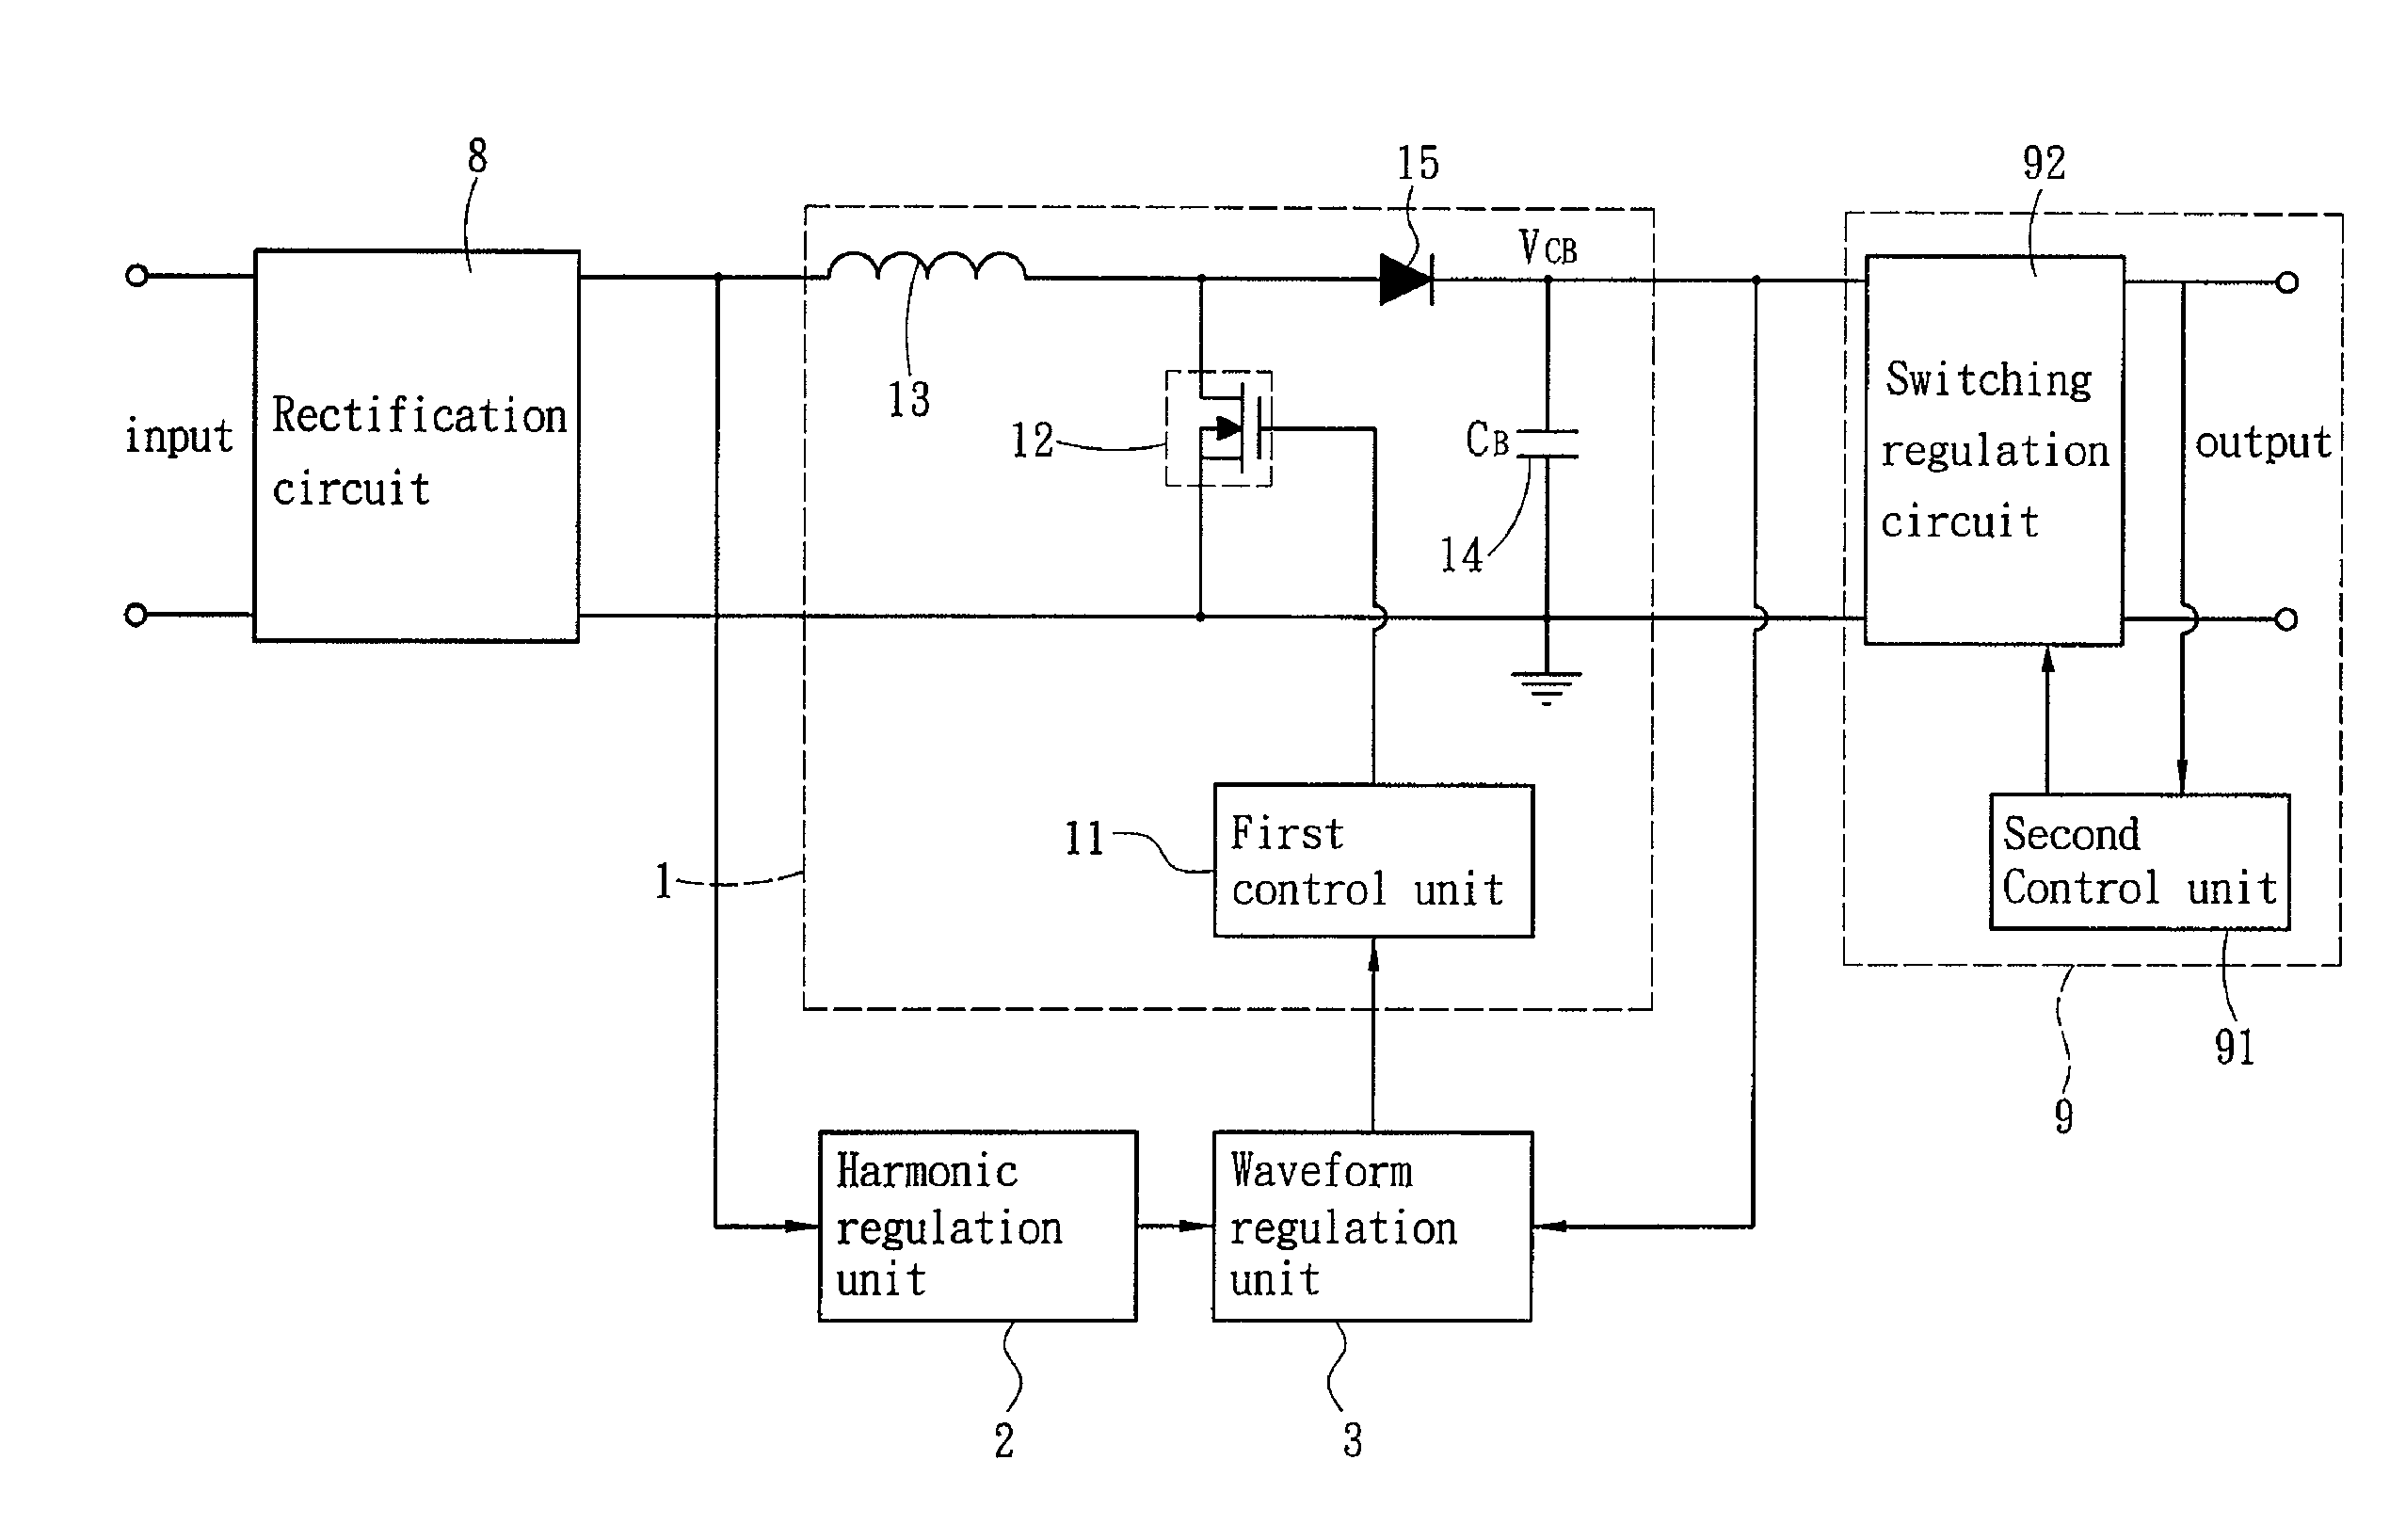 Means of eliminating electrolytic capacitor as the energy storage component in the single phase AD/DC two-stage converter